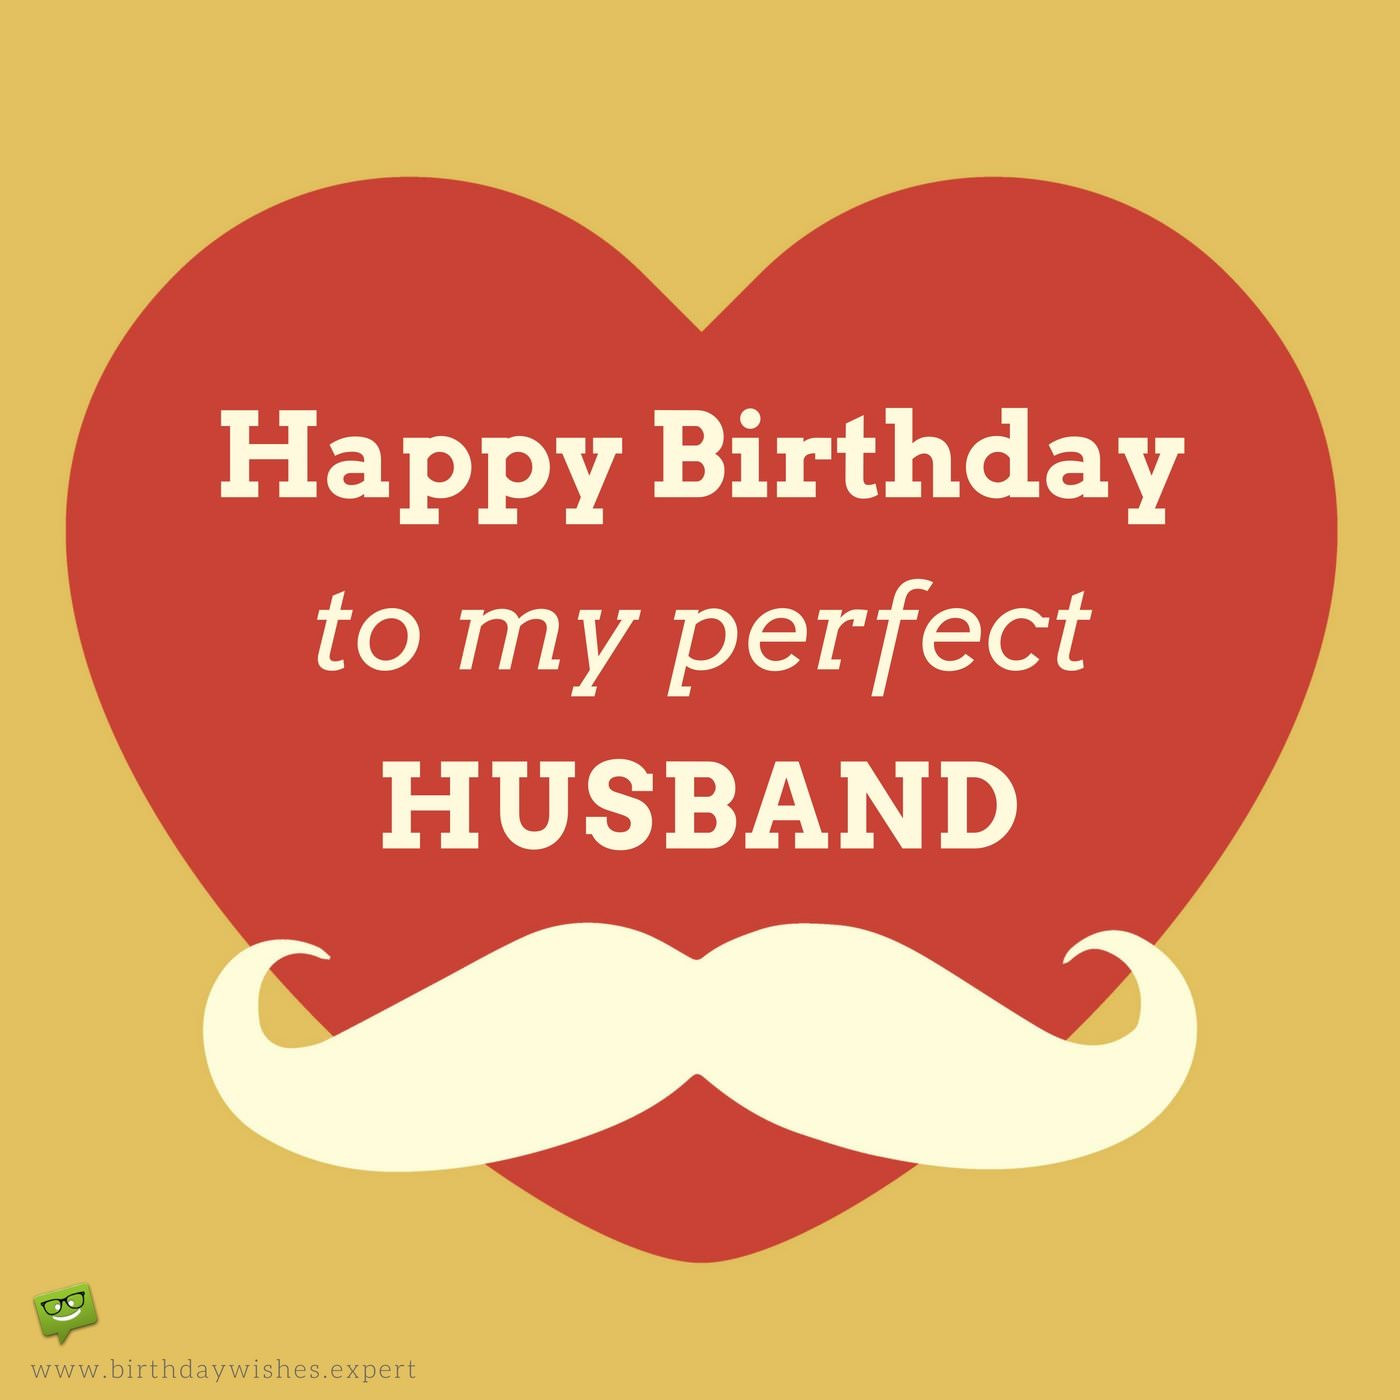 Happy Birthday Wishes Husband
 Original Birthday Quotes for your Husband